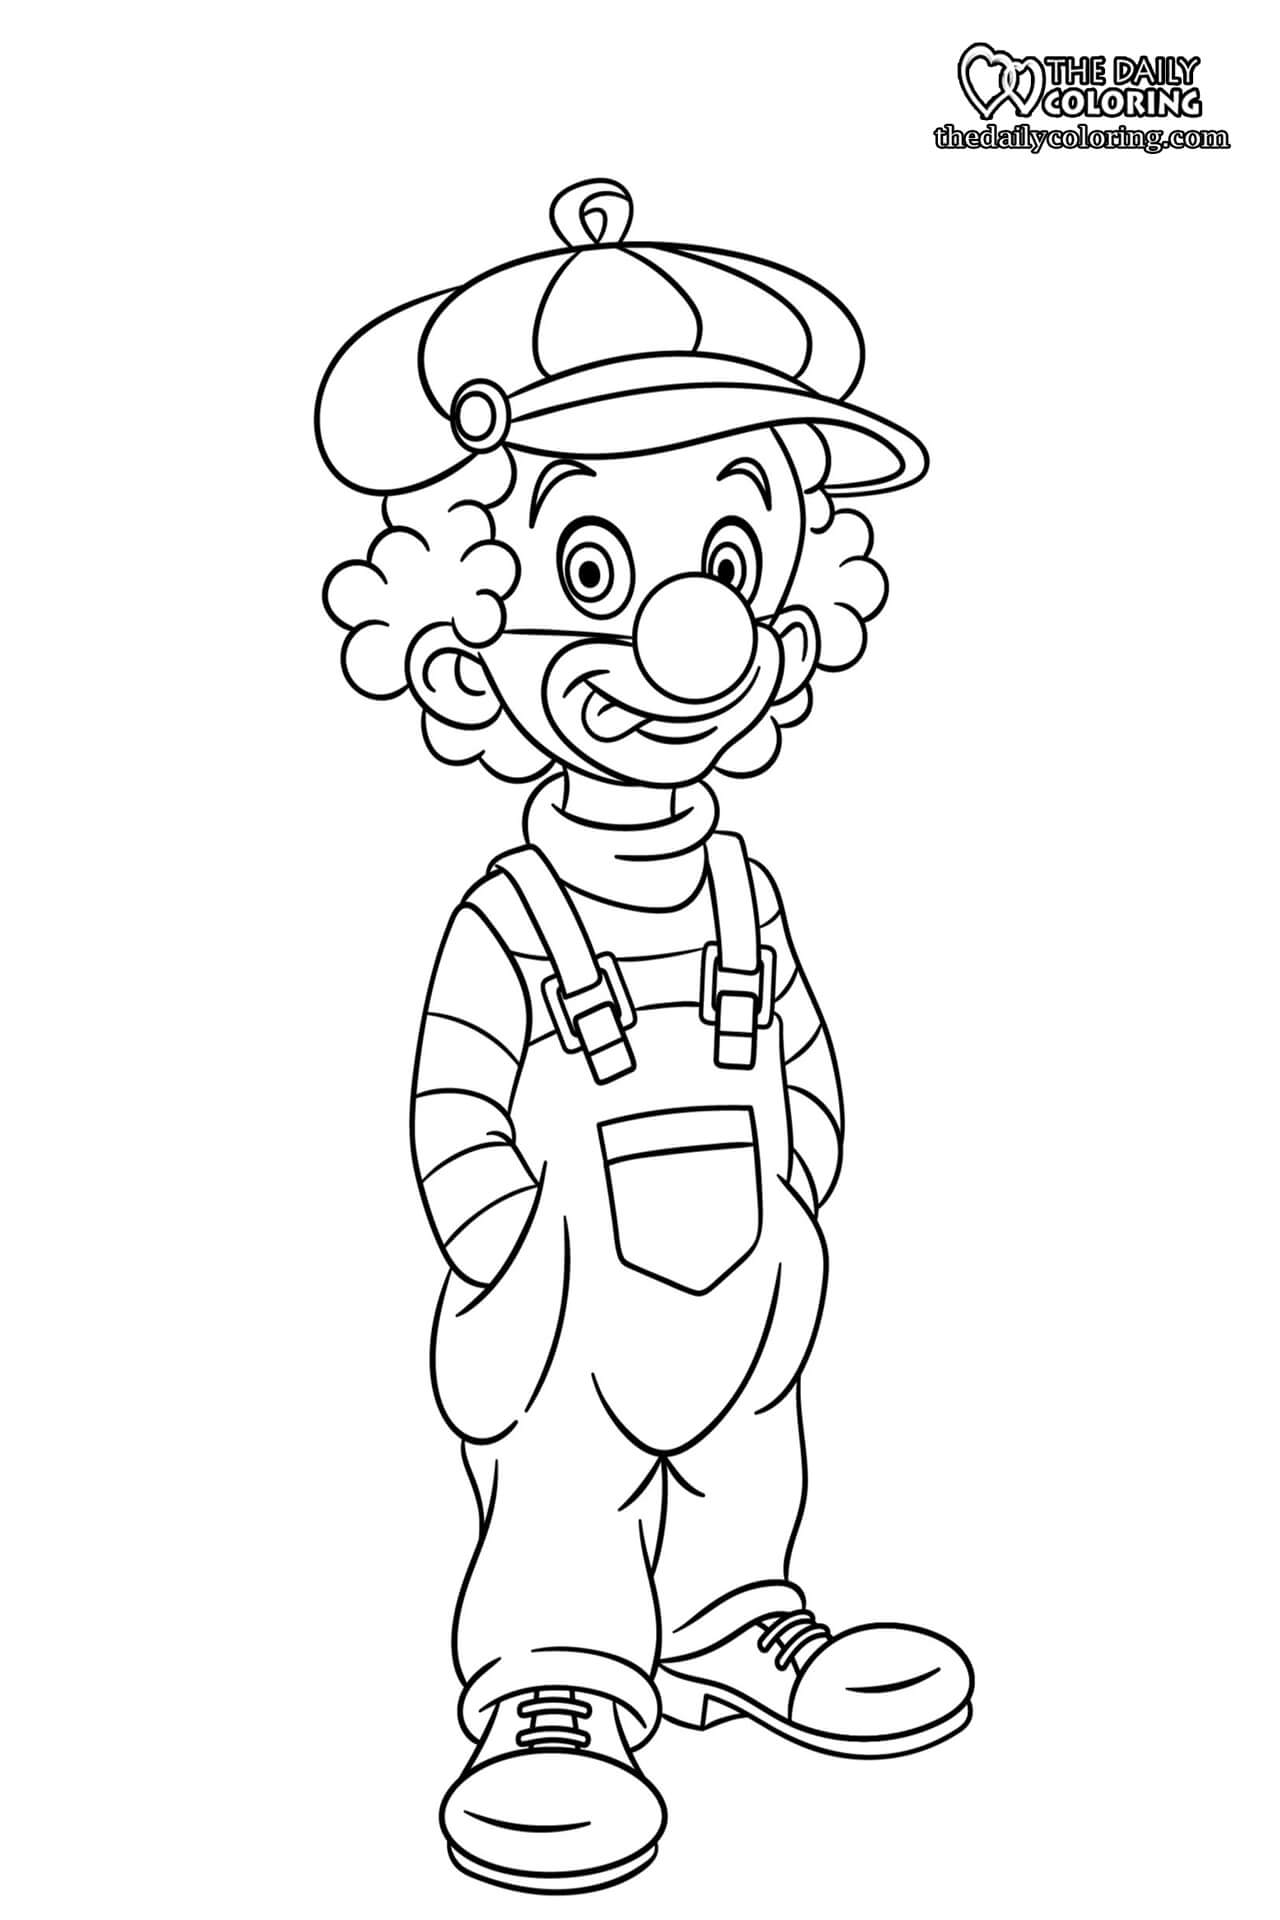 clown-coloring-pages